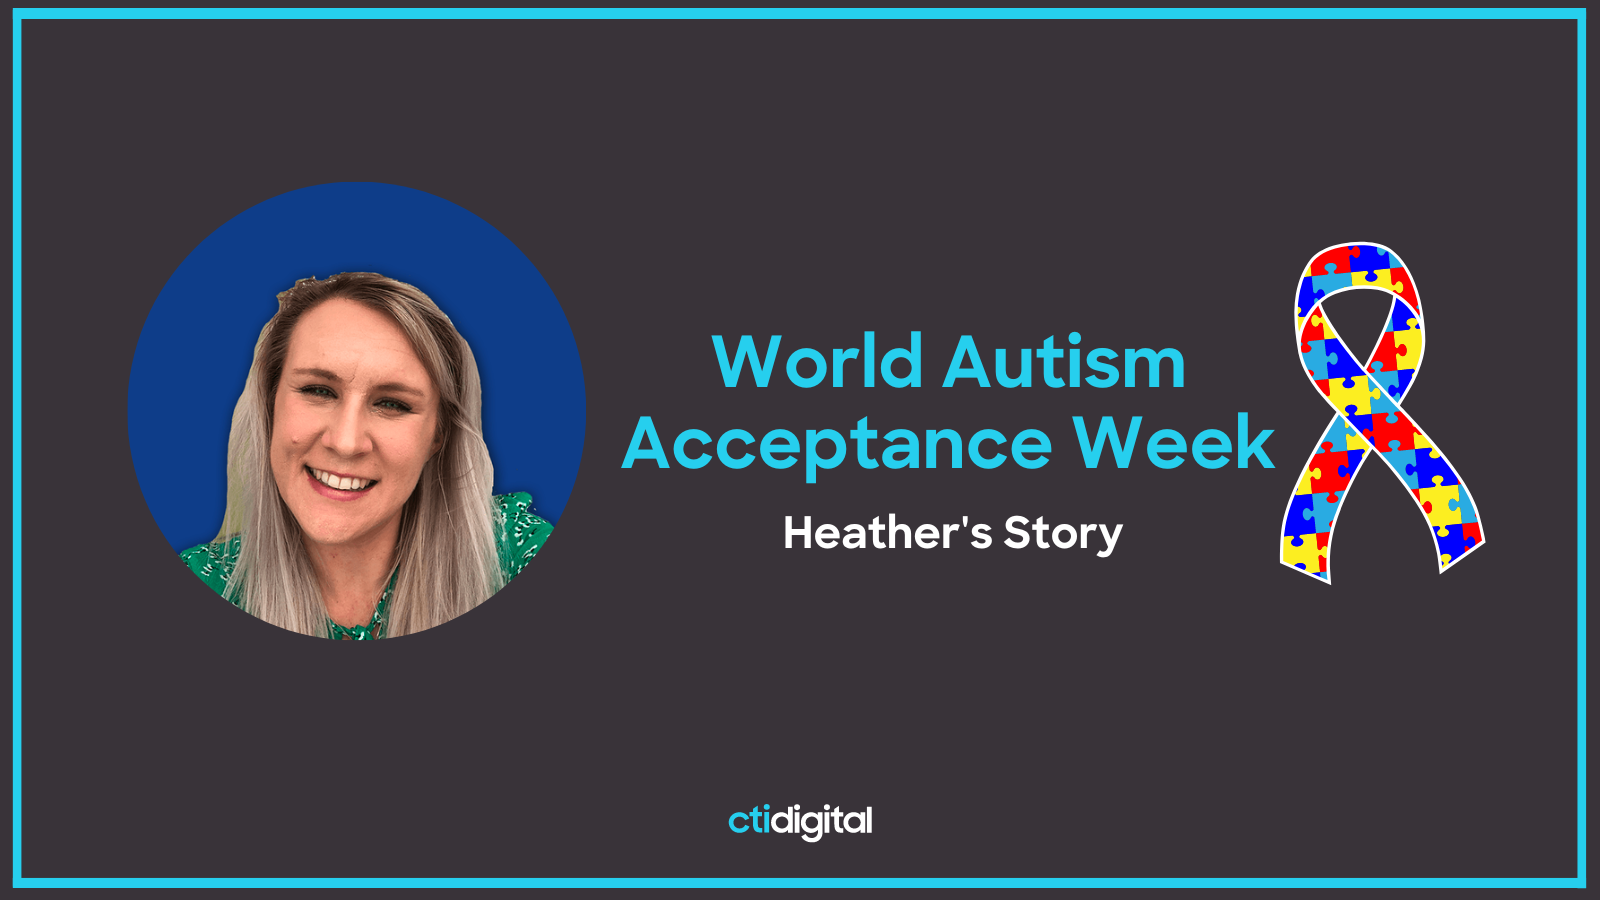 World Autism Acceptance Week: Heather’s story